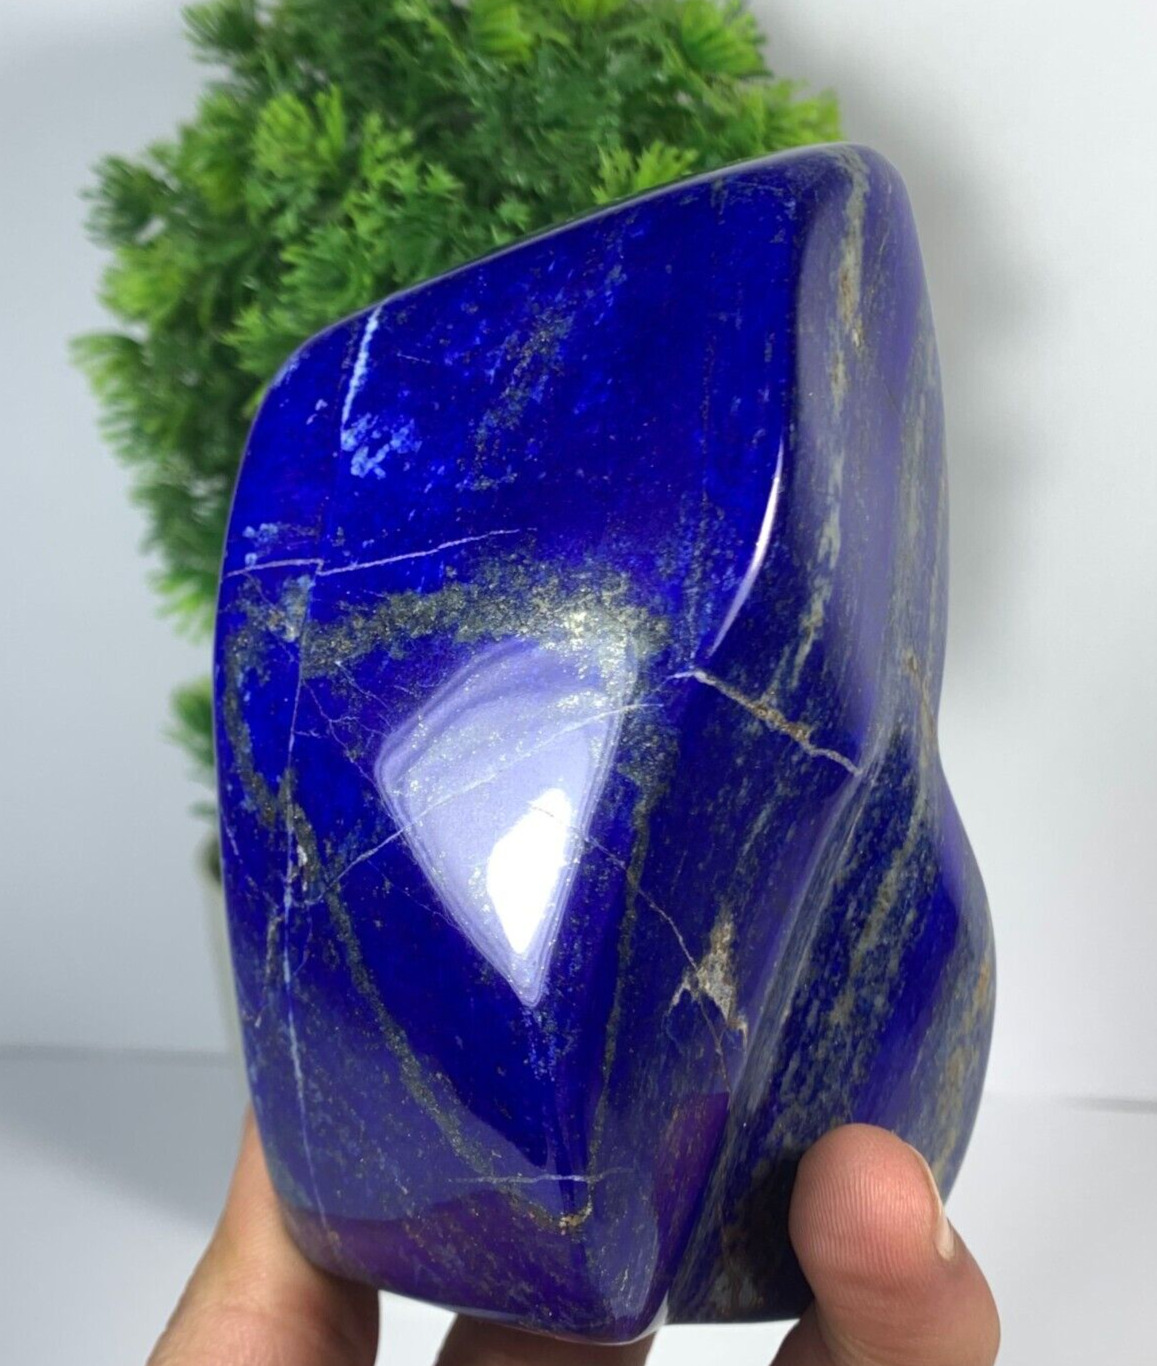 939g Lapis Lazuli Freeform Rough AAA+ Grade Tumbled Polished From Afghanistan